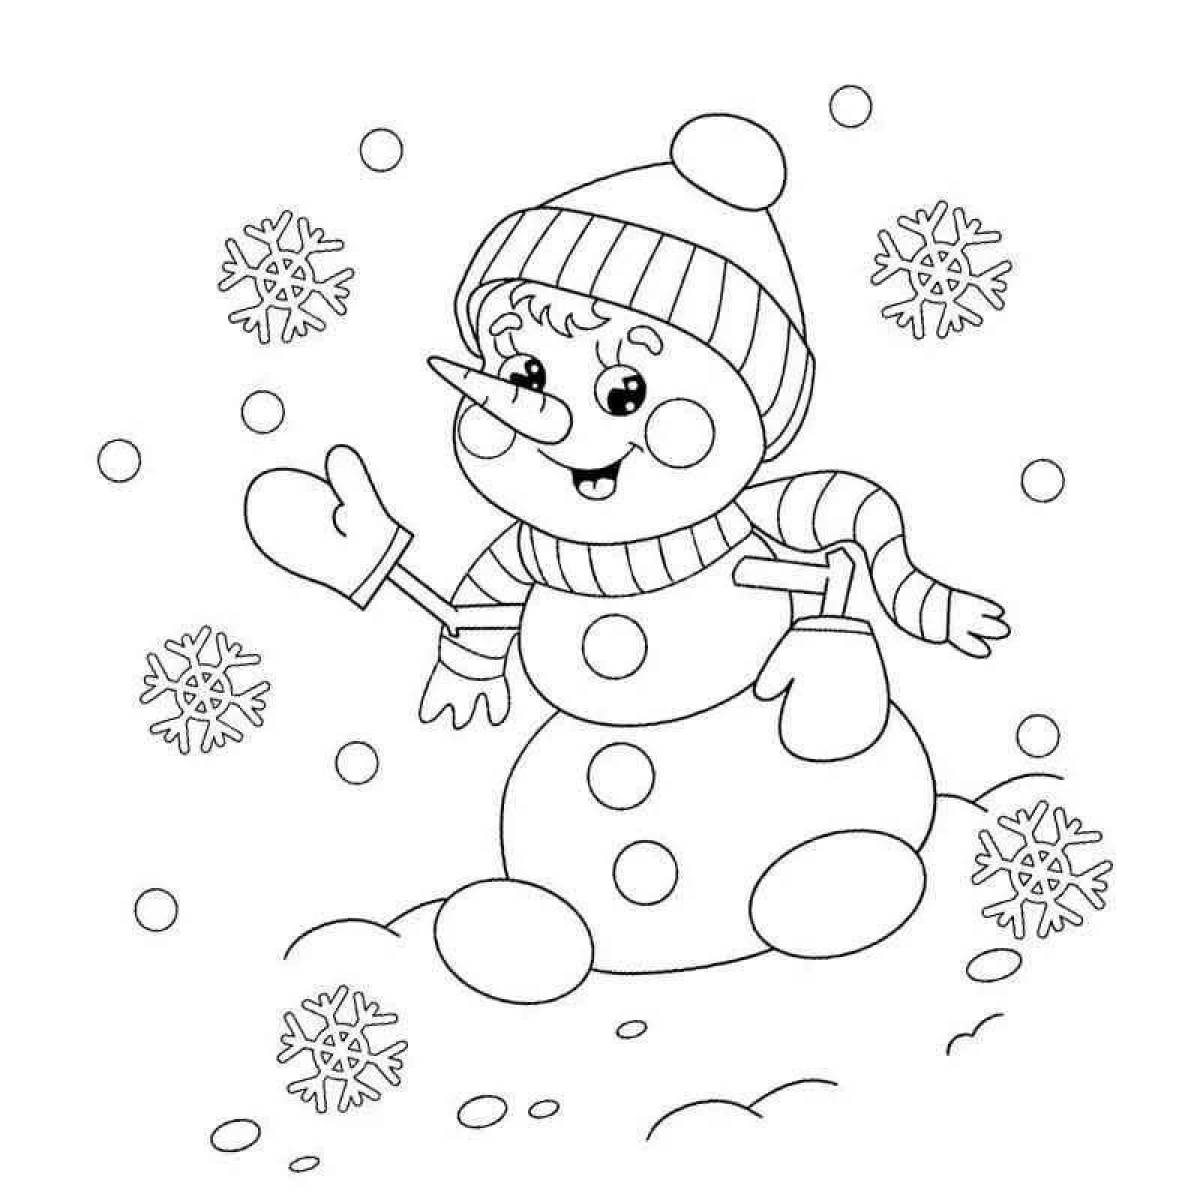 Creative snowman coloring book for 4-5 year olds